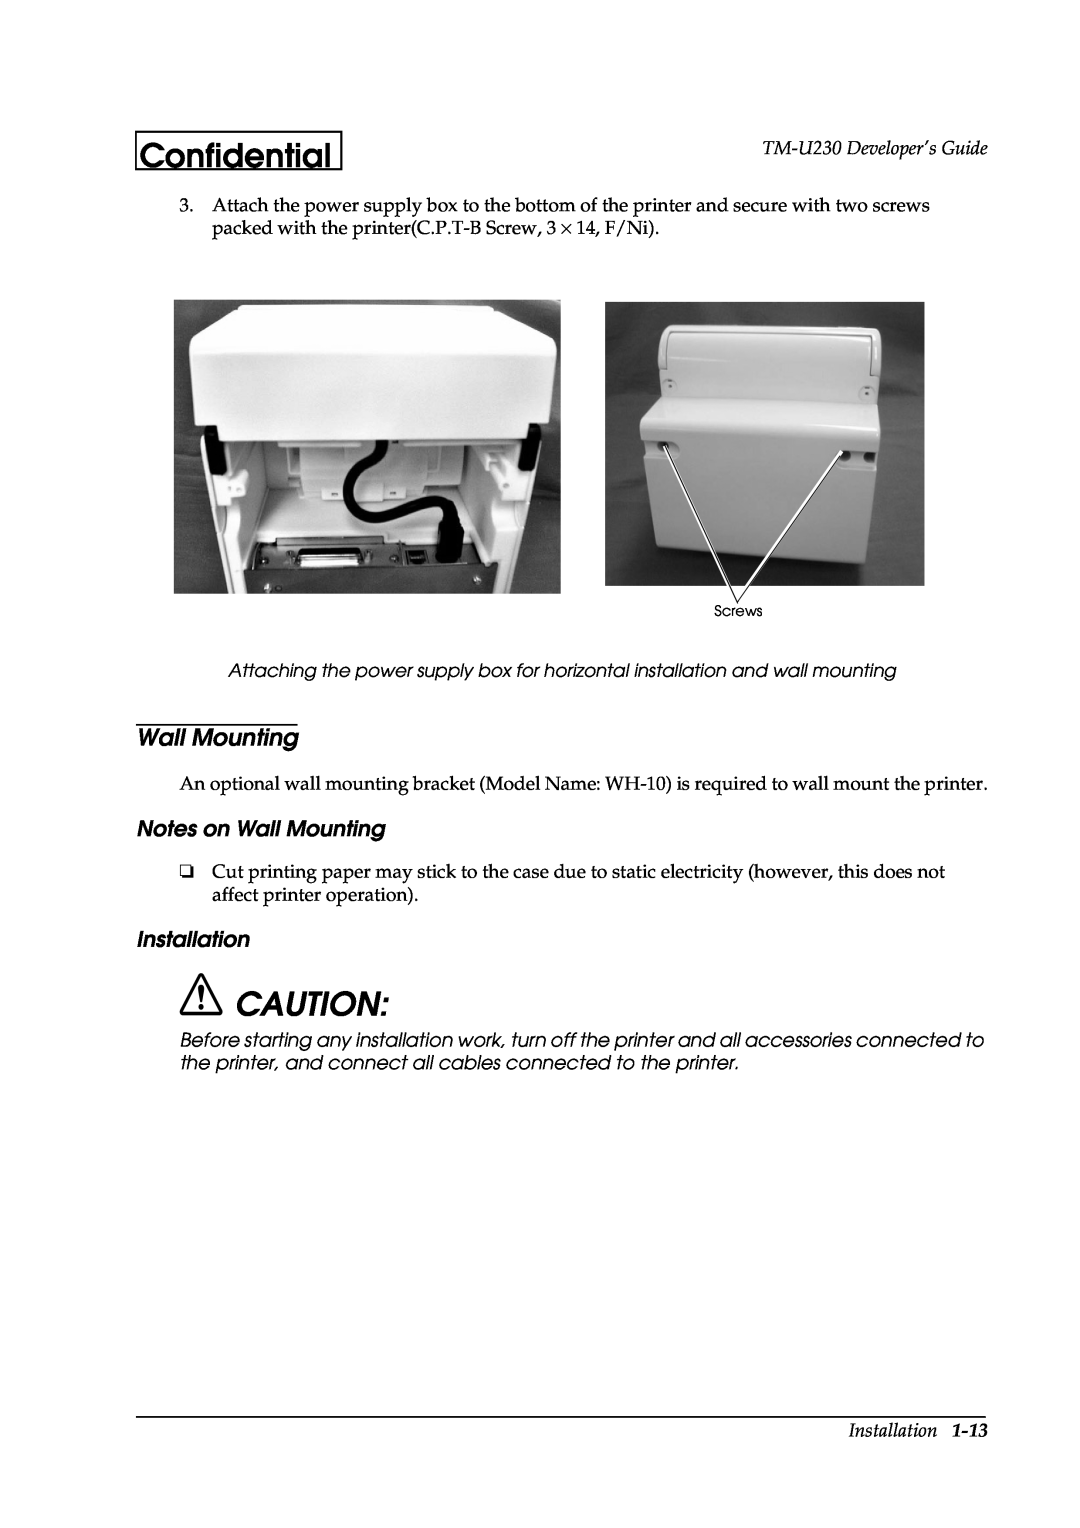 Epson manual Notes on Wall Mounting, Installation, Confidential, TM-U230 Developer’s Guide 